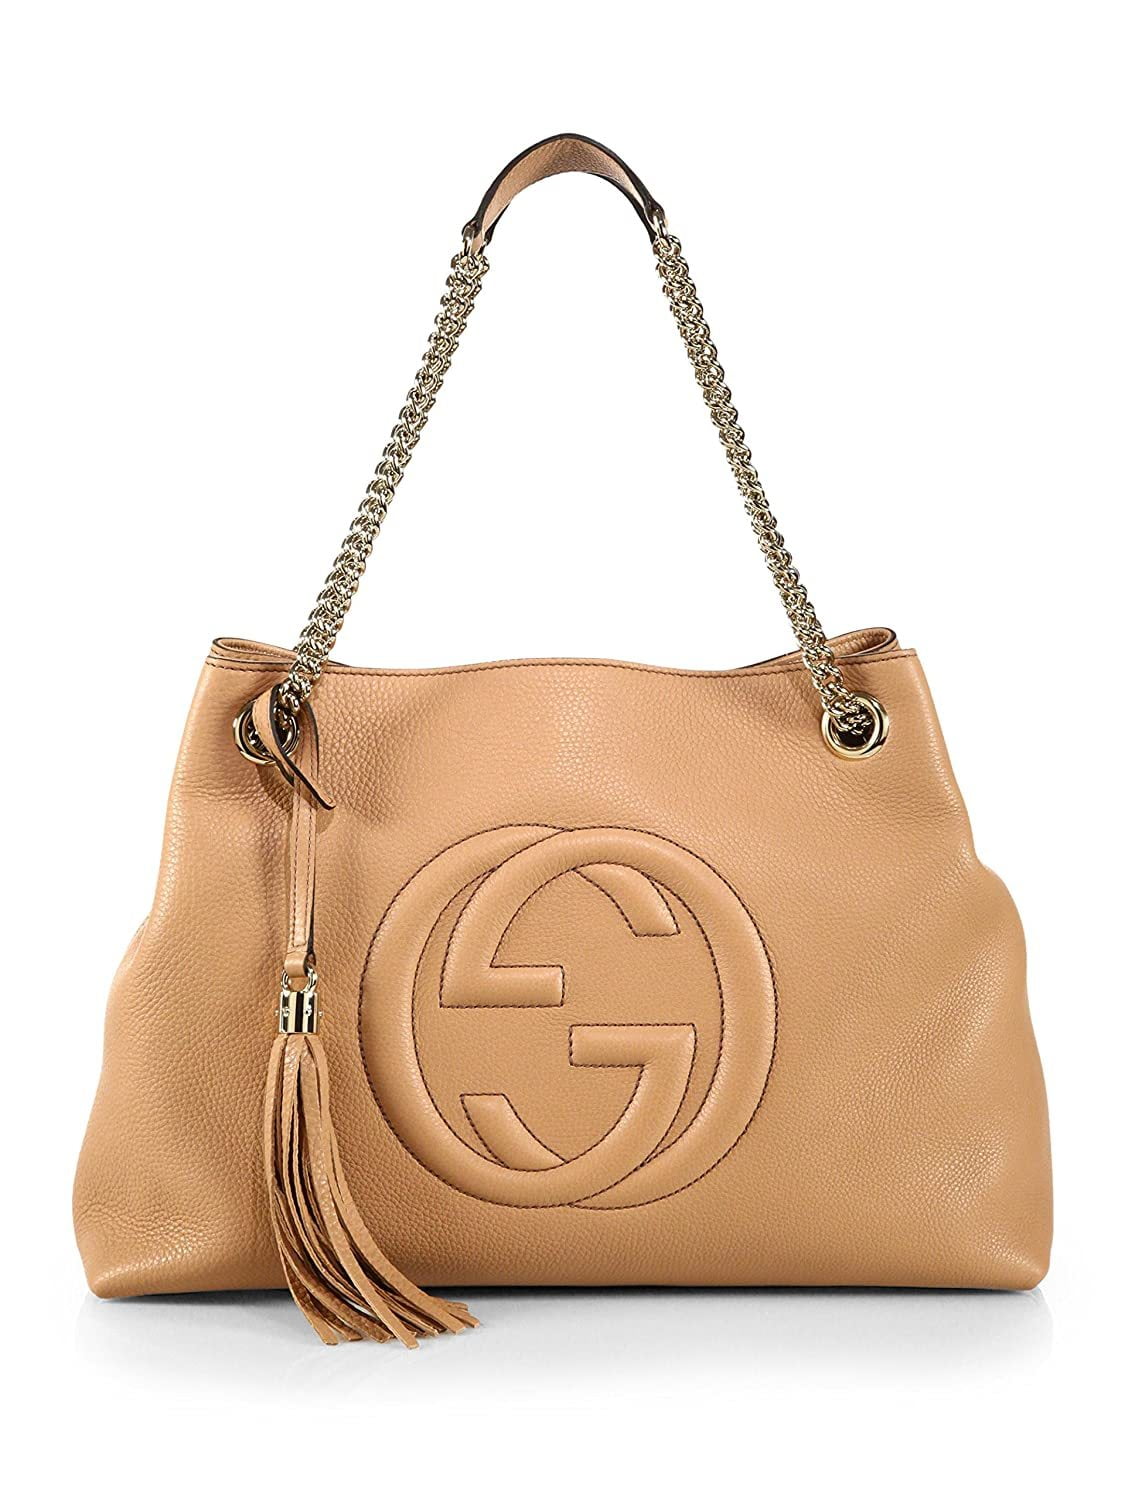 Gucci Brown Pebbled Leather Soho Disco Bag